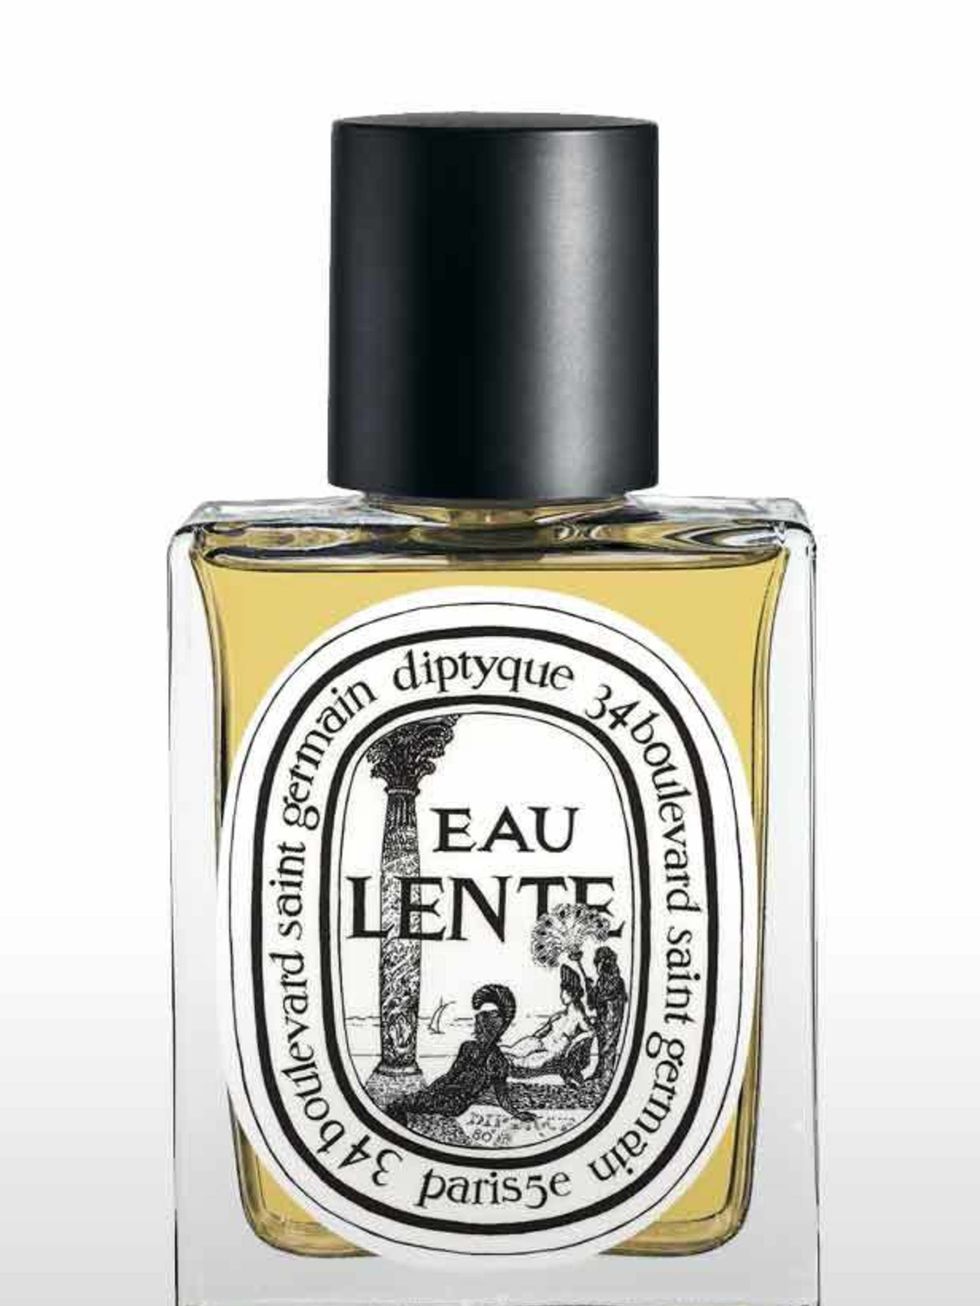 <p>Created in 1986 Eau Lente focuses on the opopanax ingredient, a resin from an Iranian tree. The opopanax has a hint of vanilla, which combined with cinnamon and a mix of Indian spices gives Eau Lente a hint of incense combined with a soft, sweetness.</